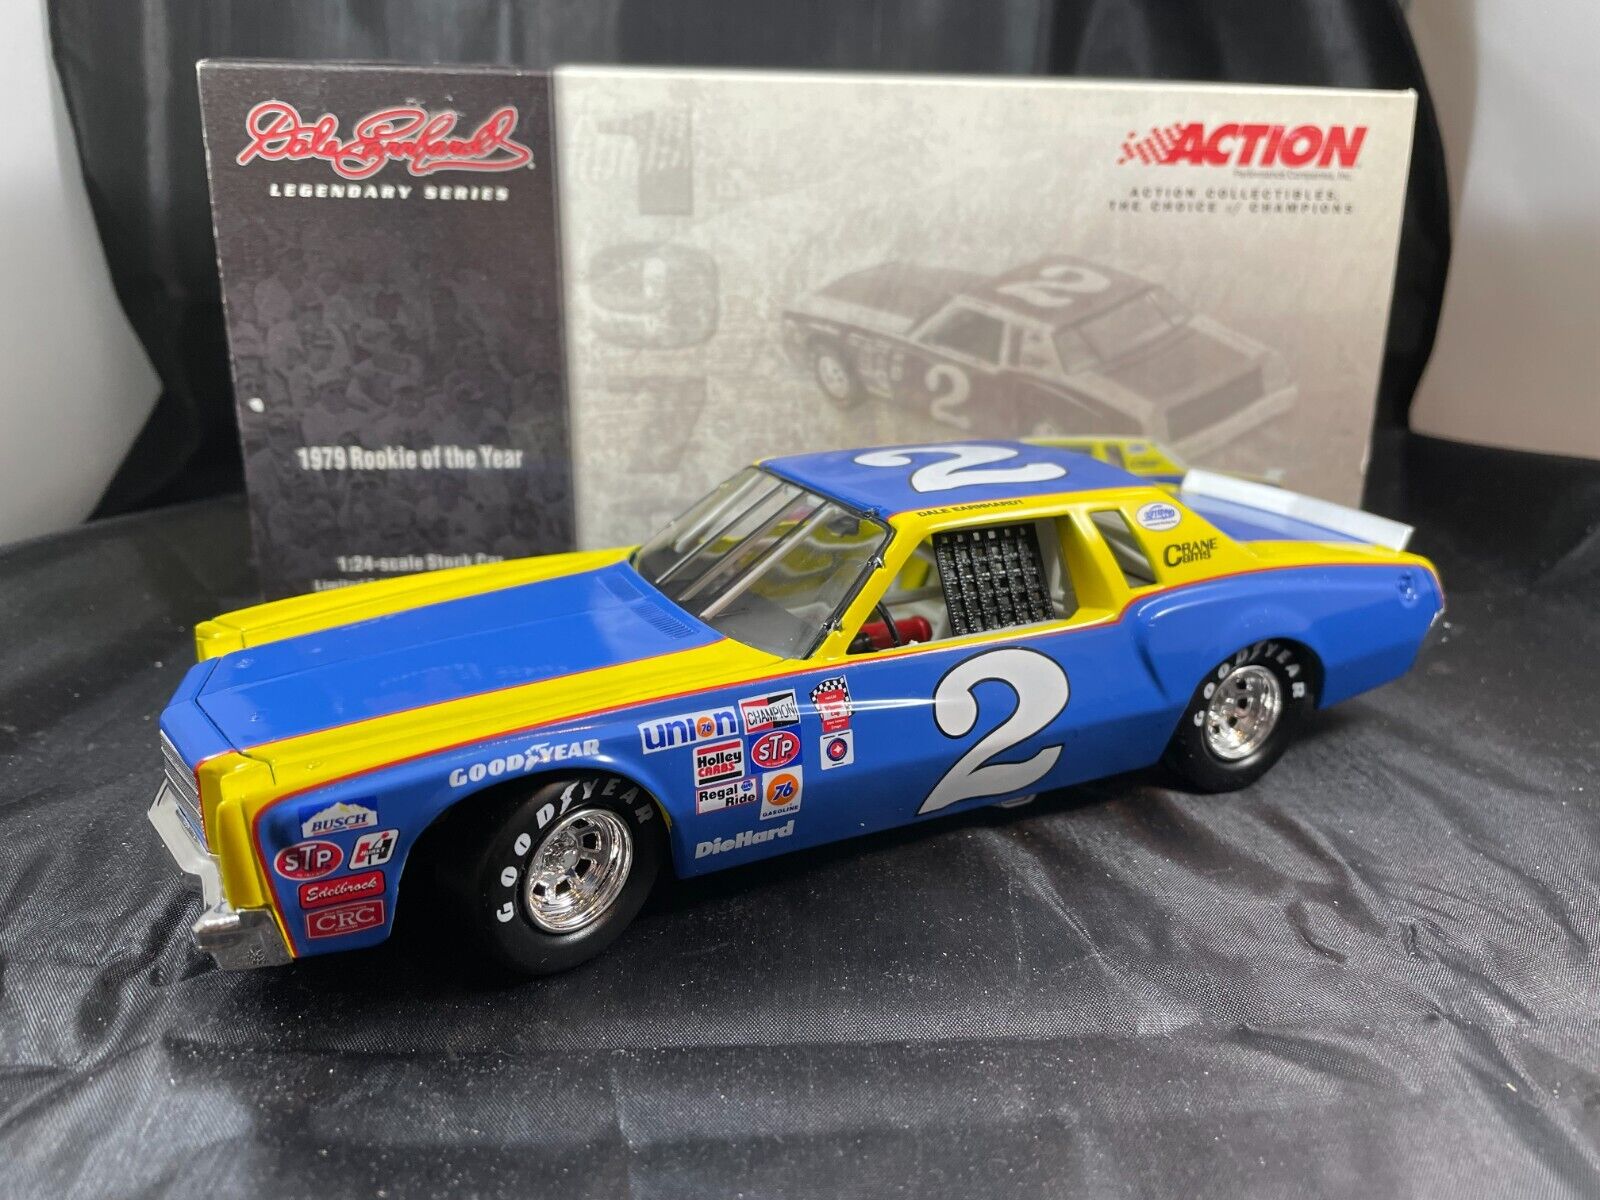 DALE EARNHARDT #2 ROOKIE OF THE YEAR-NASCAR LEGENDARY SERIES-1979 MONTE  CARLO